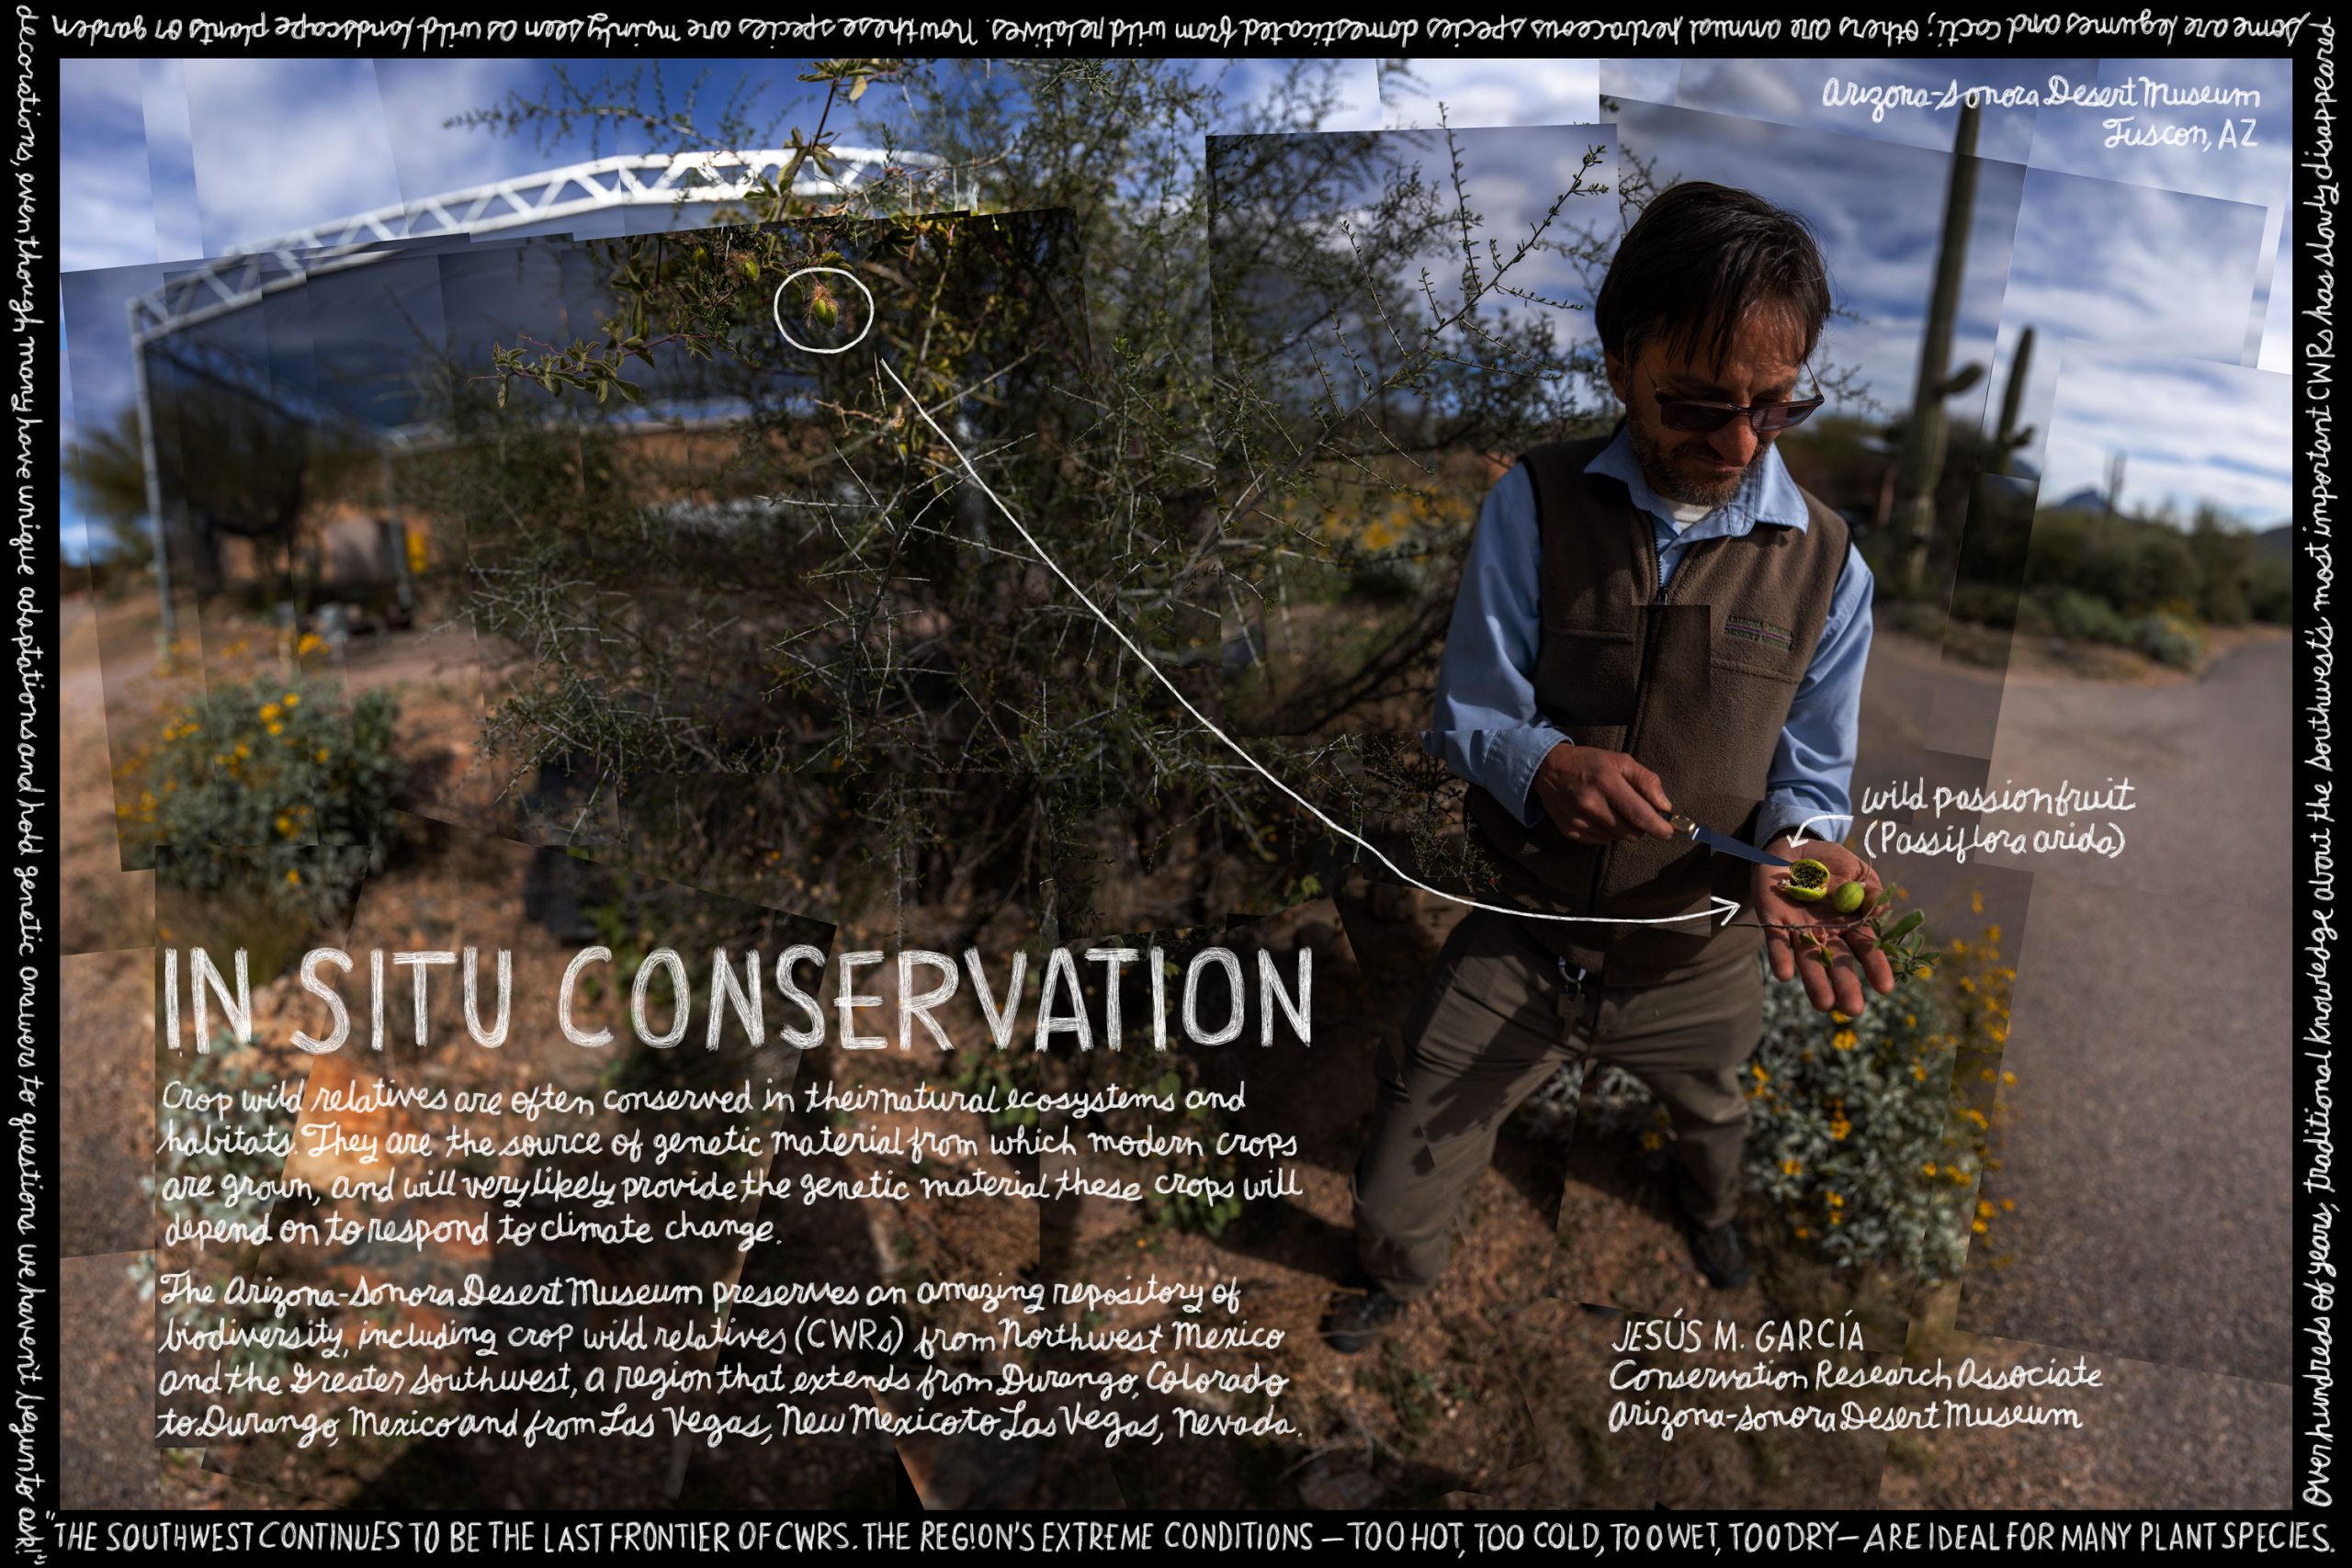 Collage poster featuring passion fruit and Jesús García of the Arizona-Sonora Desert Museum.